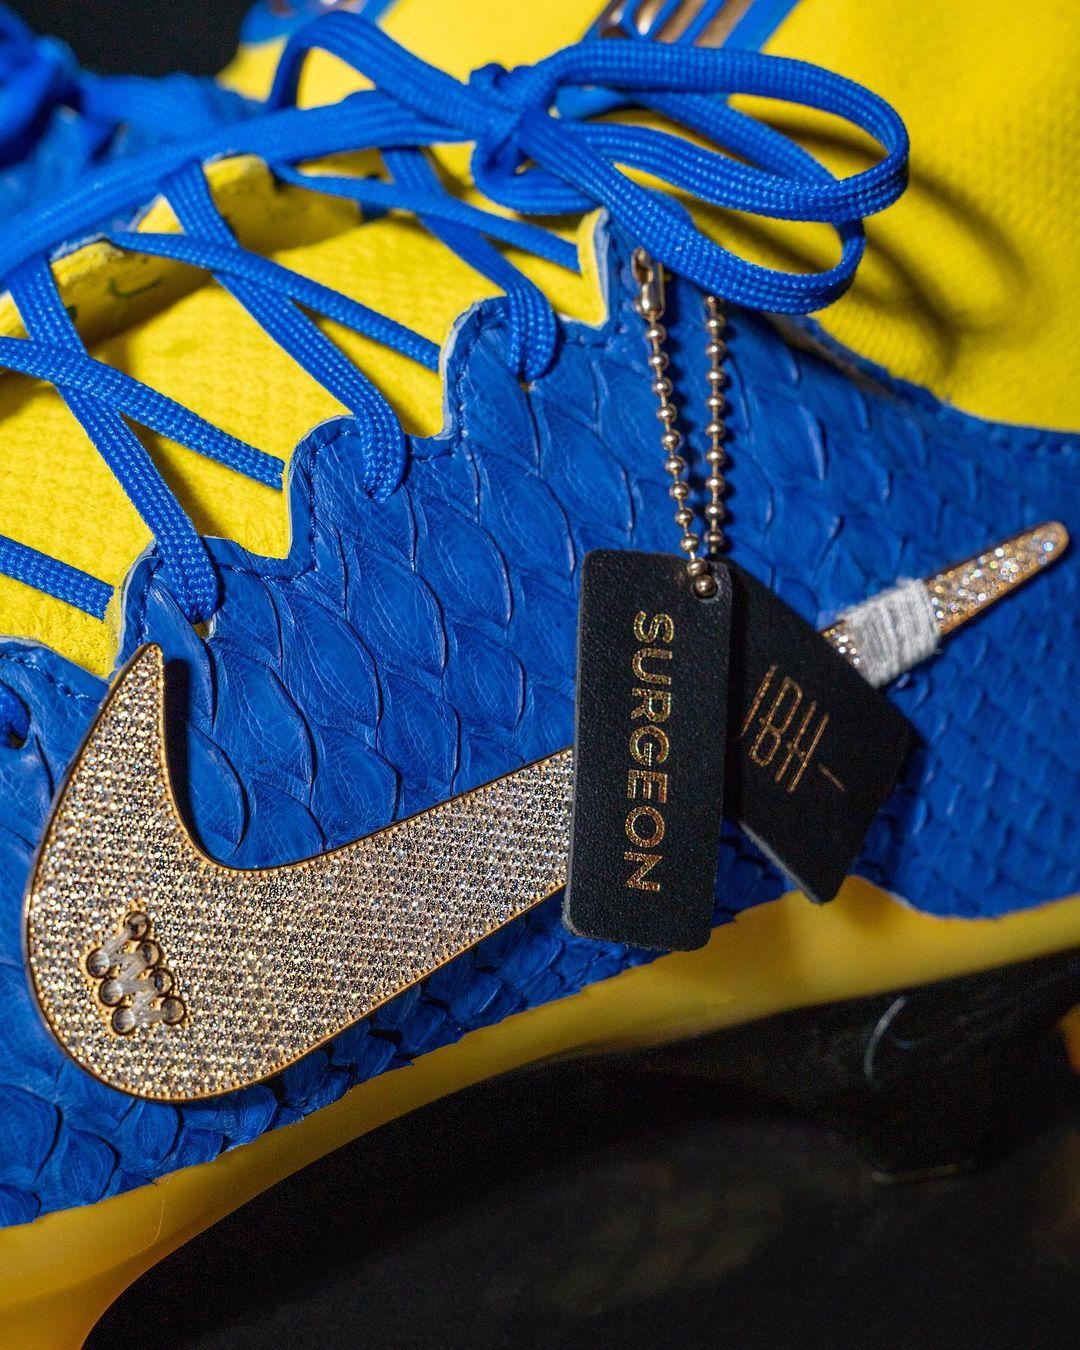 $200,000 and studded with diamonds - Rams star Odell Beckham Jr flaunts the  most expensive cleats ever worn in the Super Bowl. - Luxurylaunches